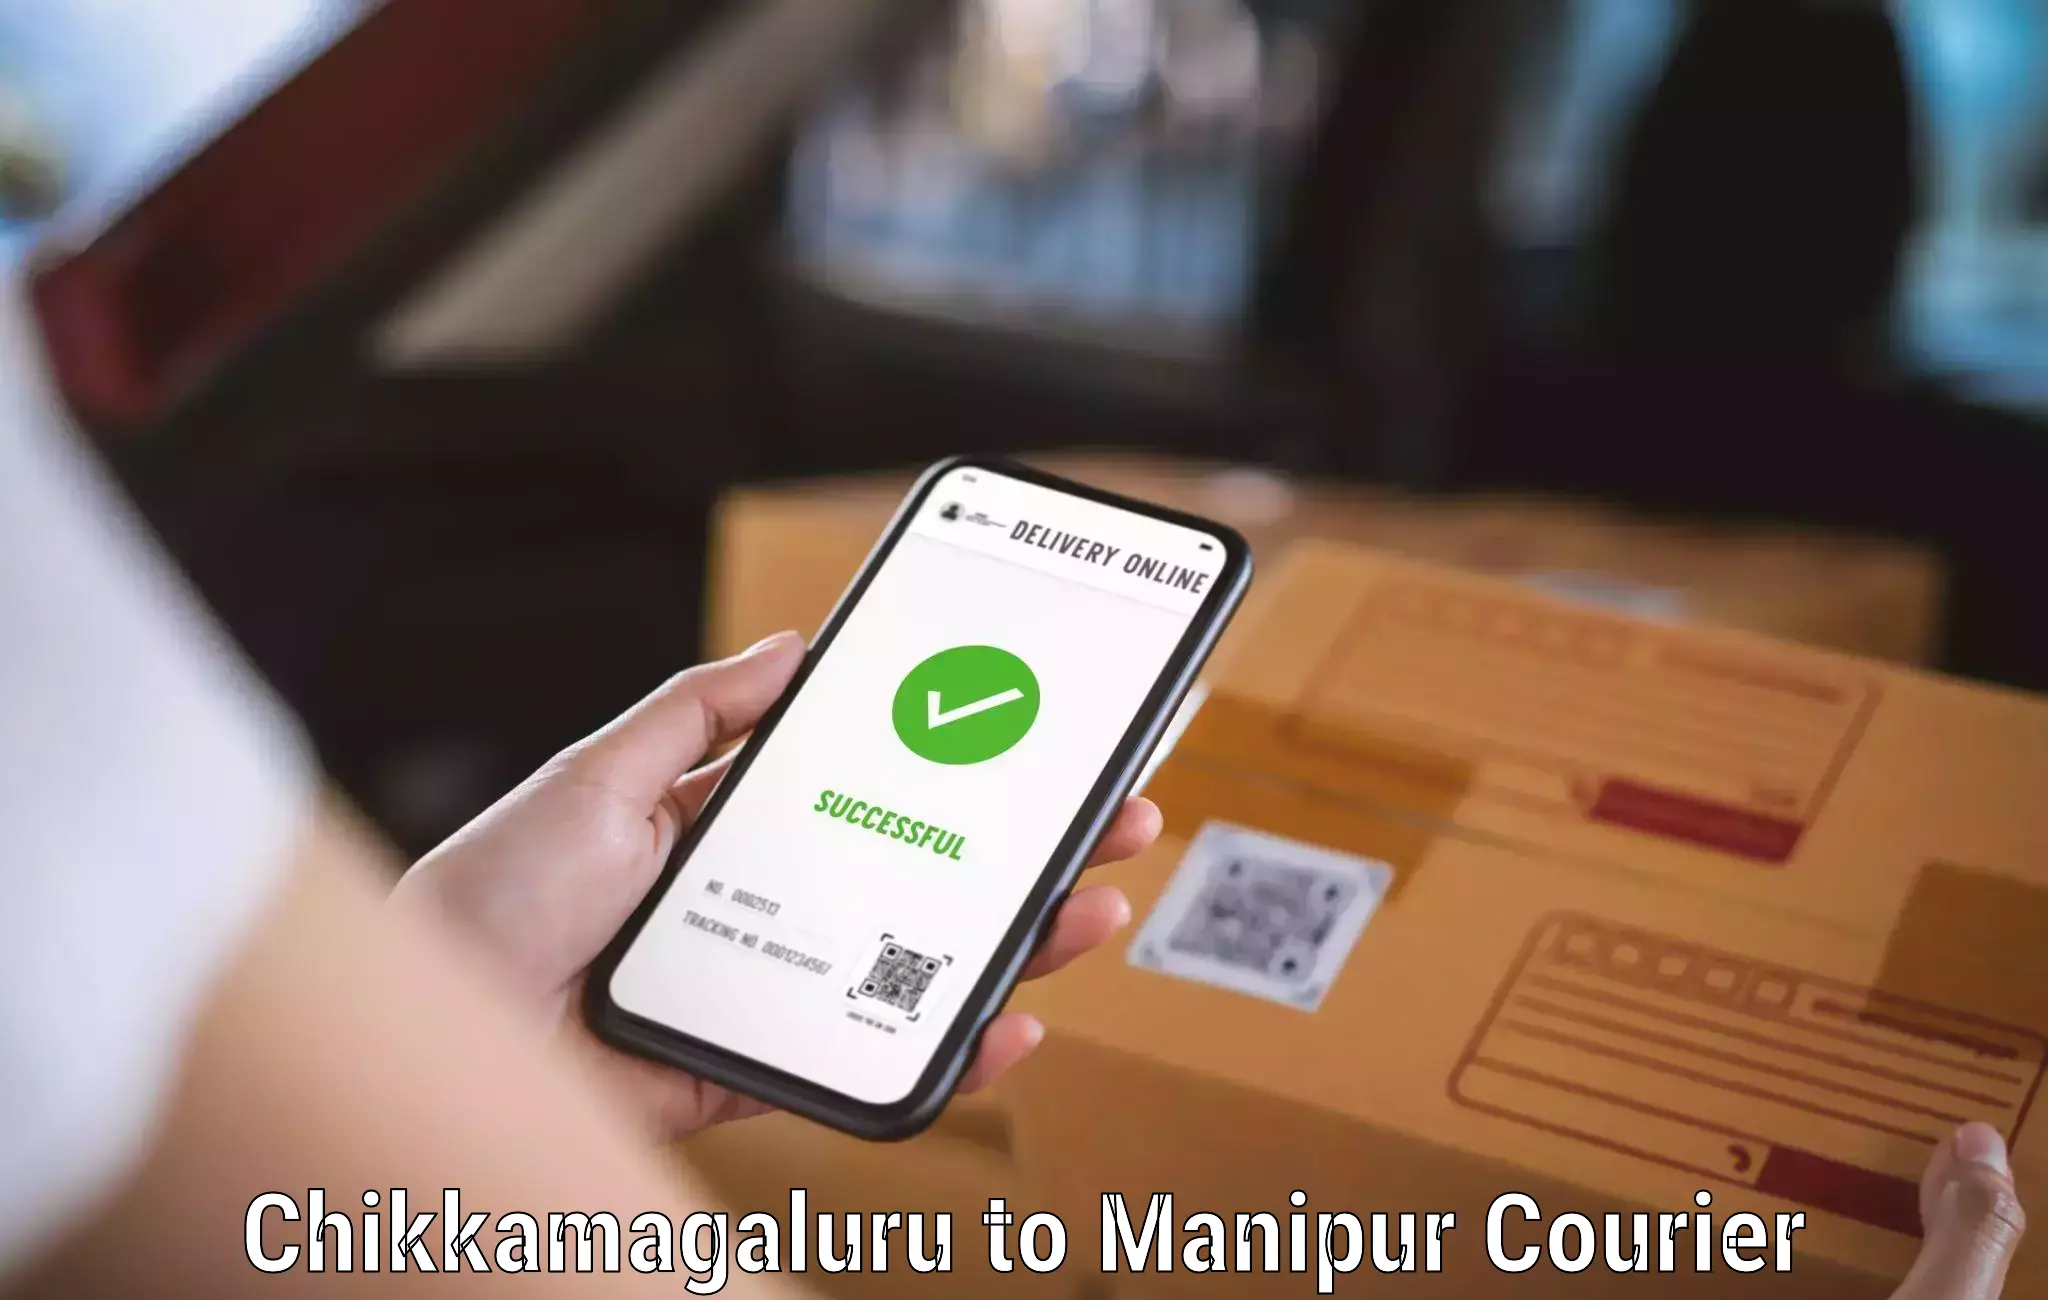 Premium delivery services Chikkamagaluru to Manipur